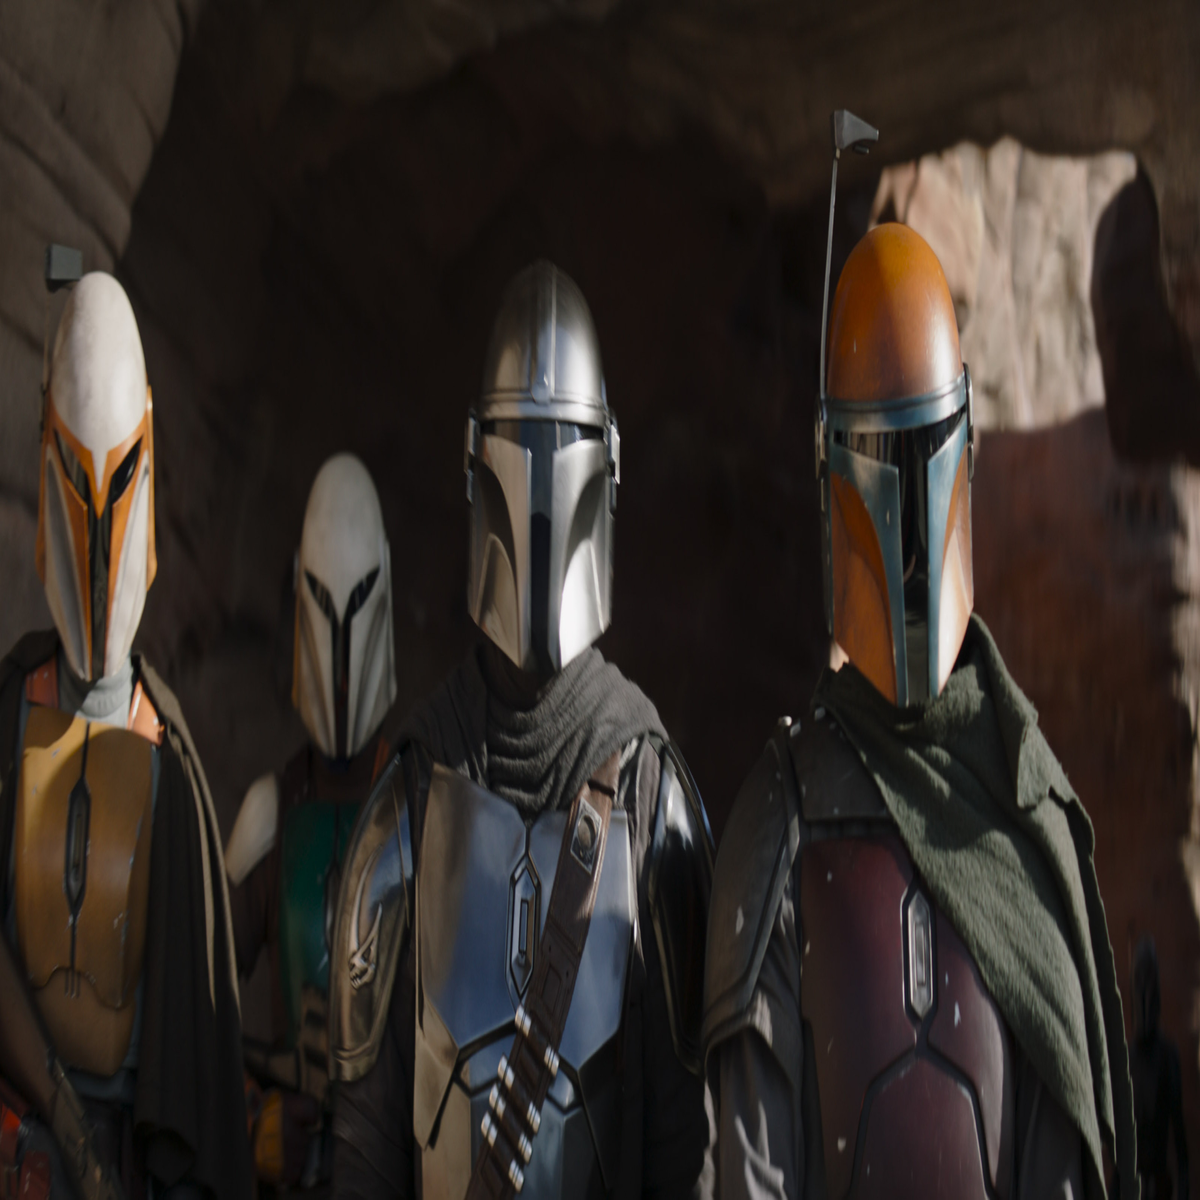 The Mandalorian Season 3 Brings Cohesion to the Star Wars Timeline